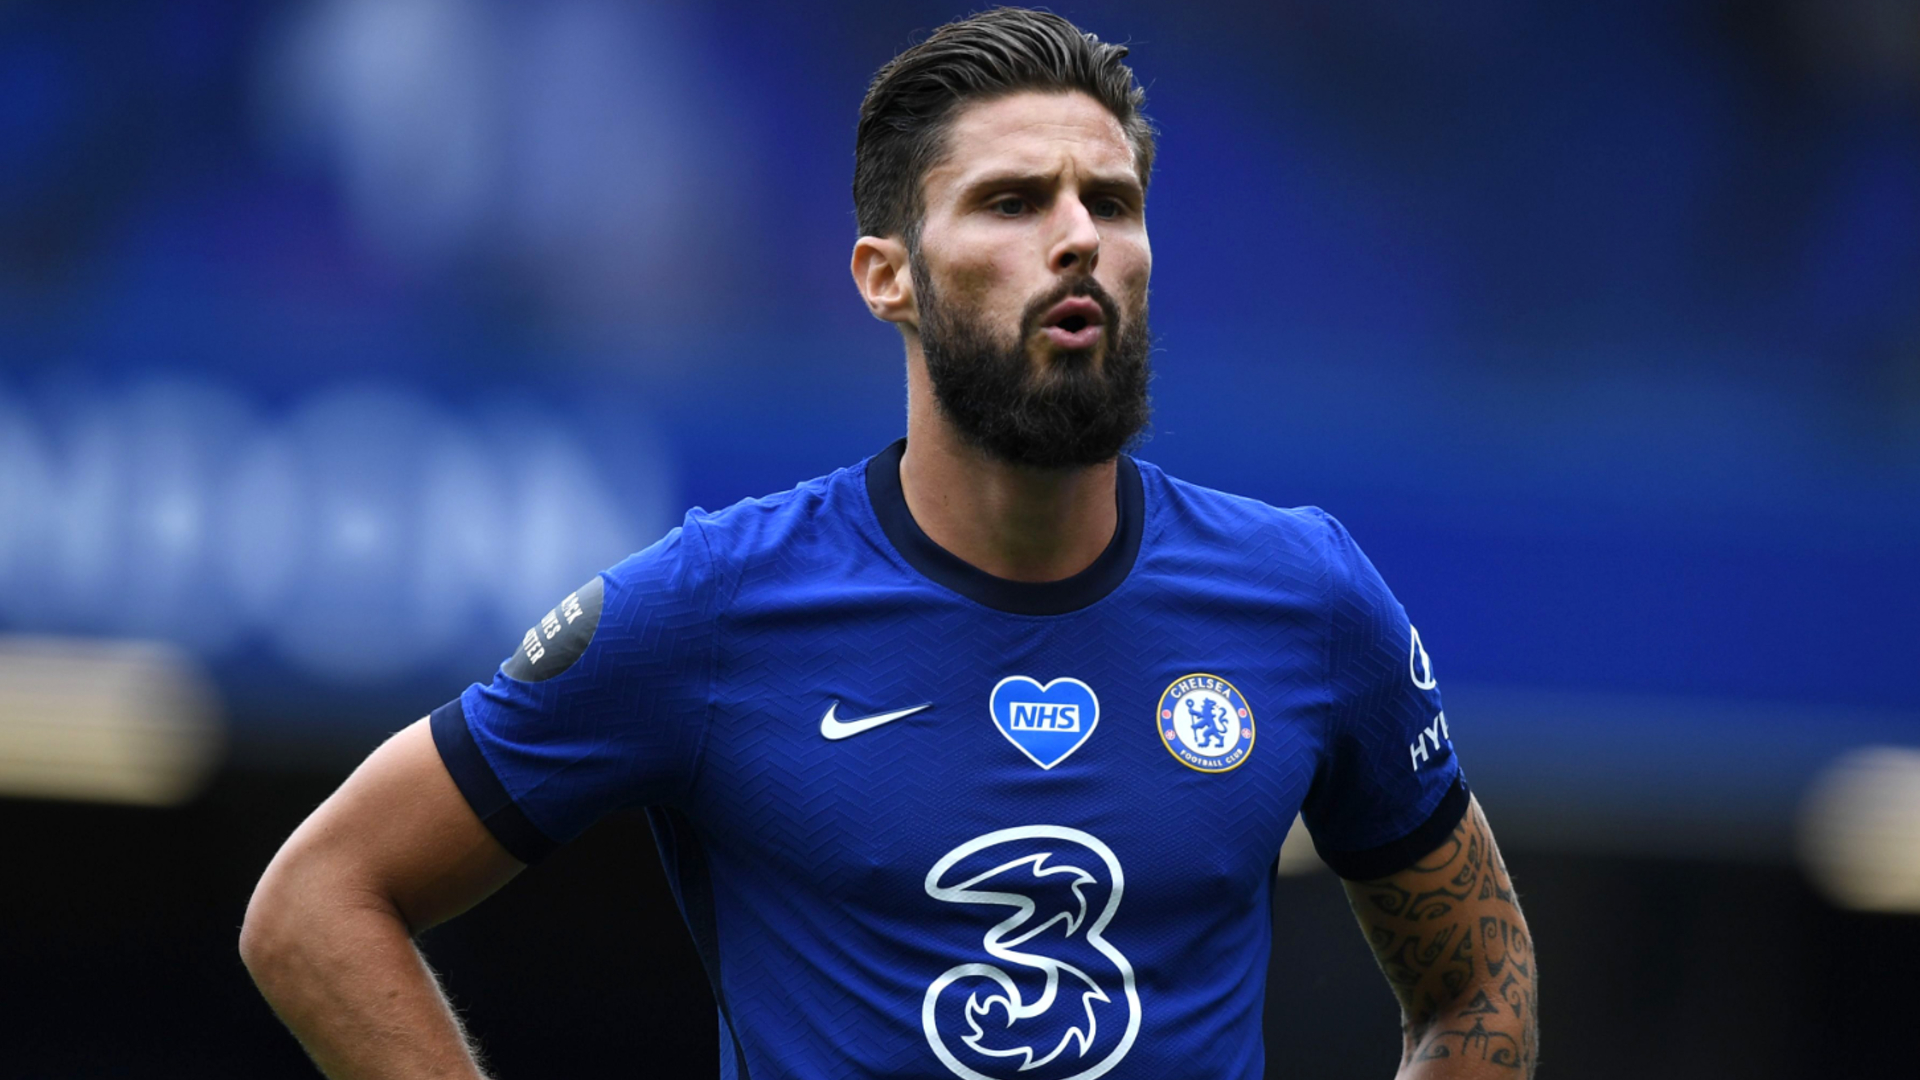 Olivier Giroud wants more game time but Frank Lampard is confident the striker will feature plenty for Chelsea.